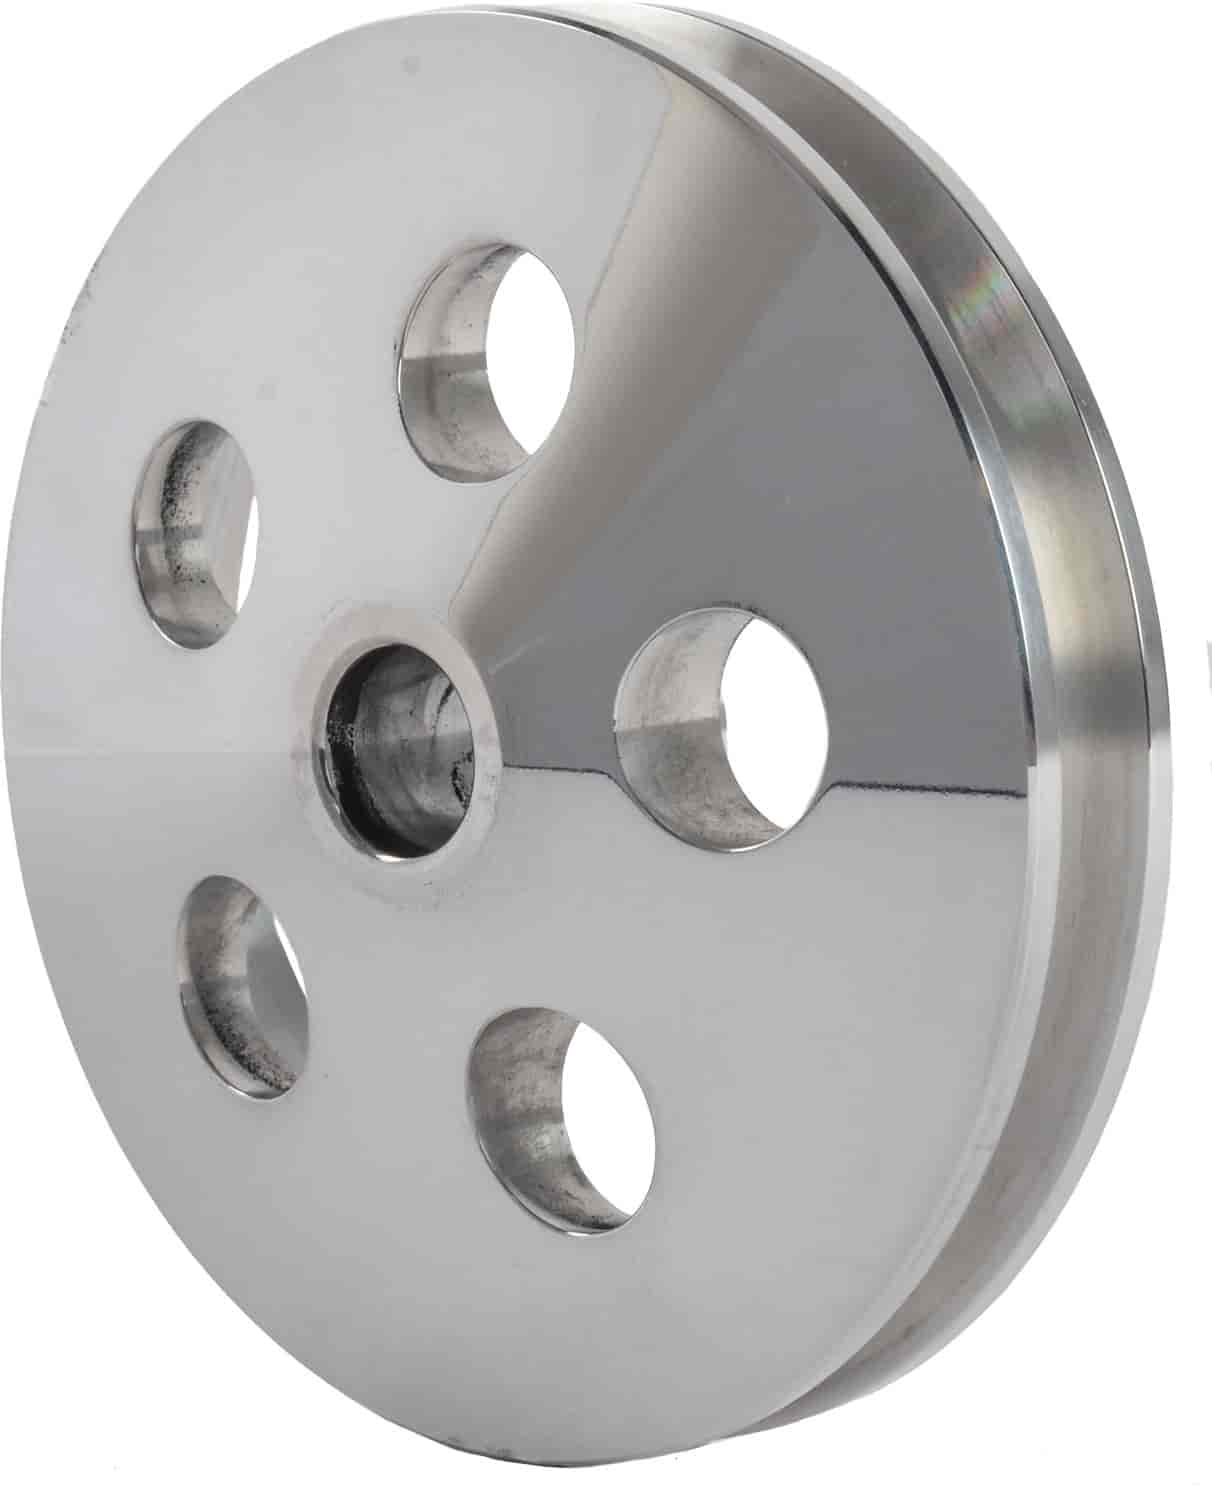 Power Steering Pulley for GM Saginaw Type II Pumps Polished